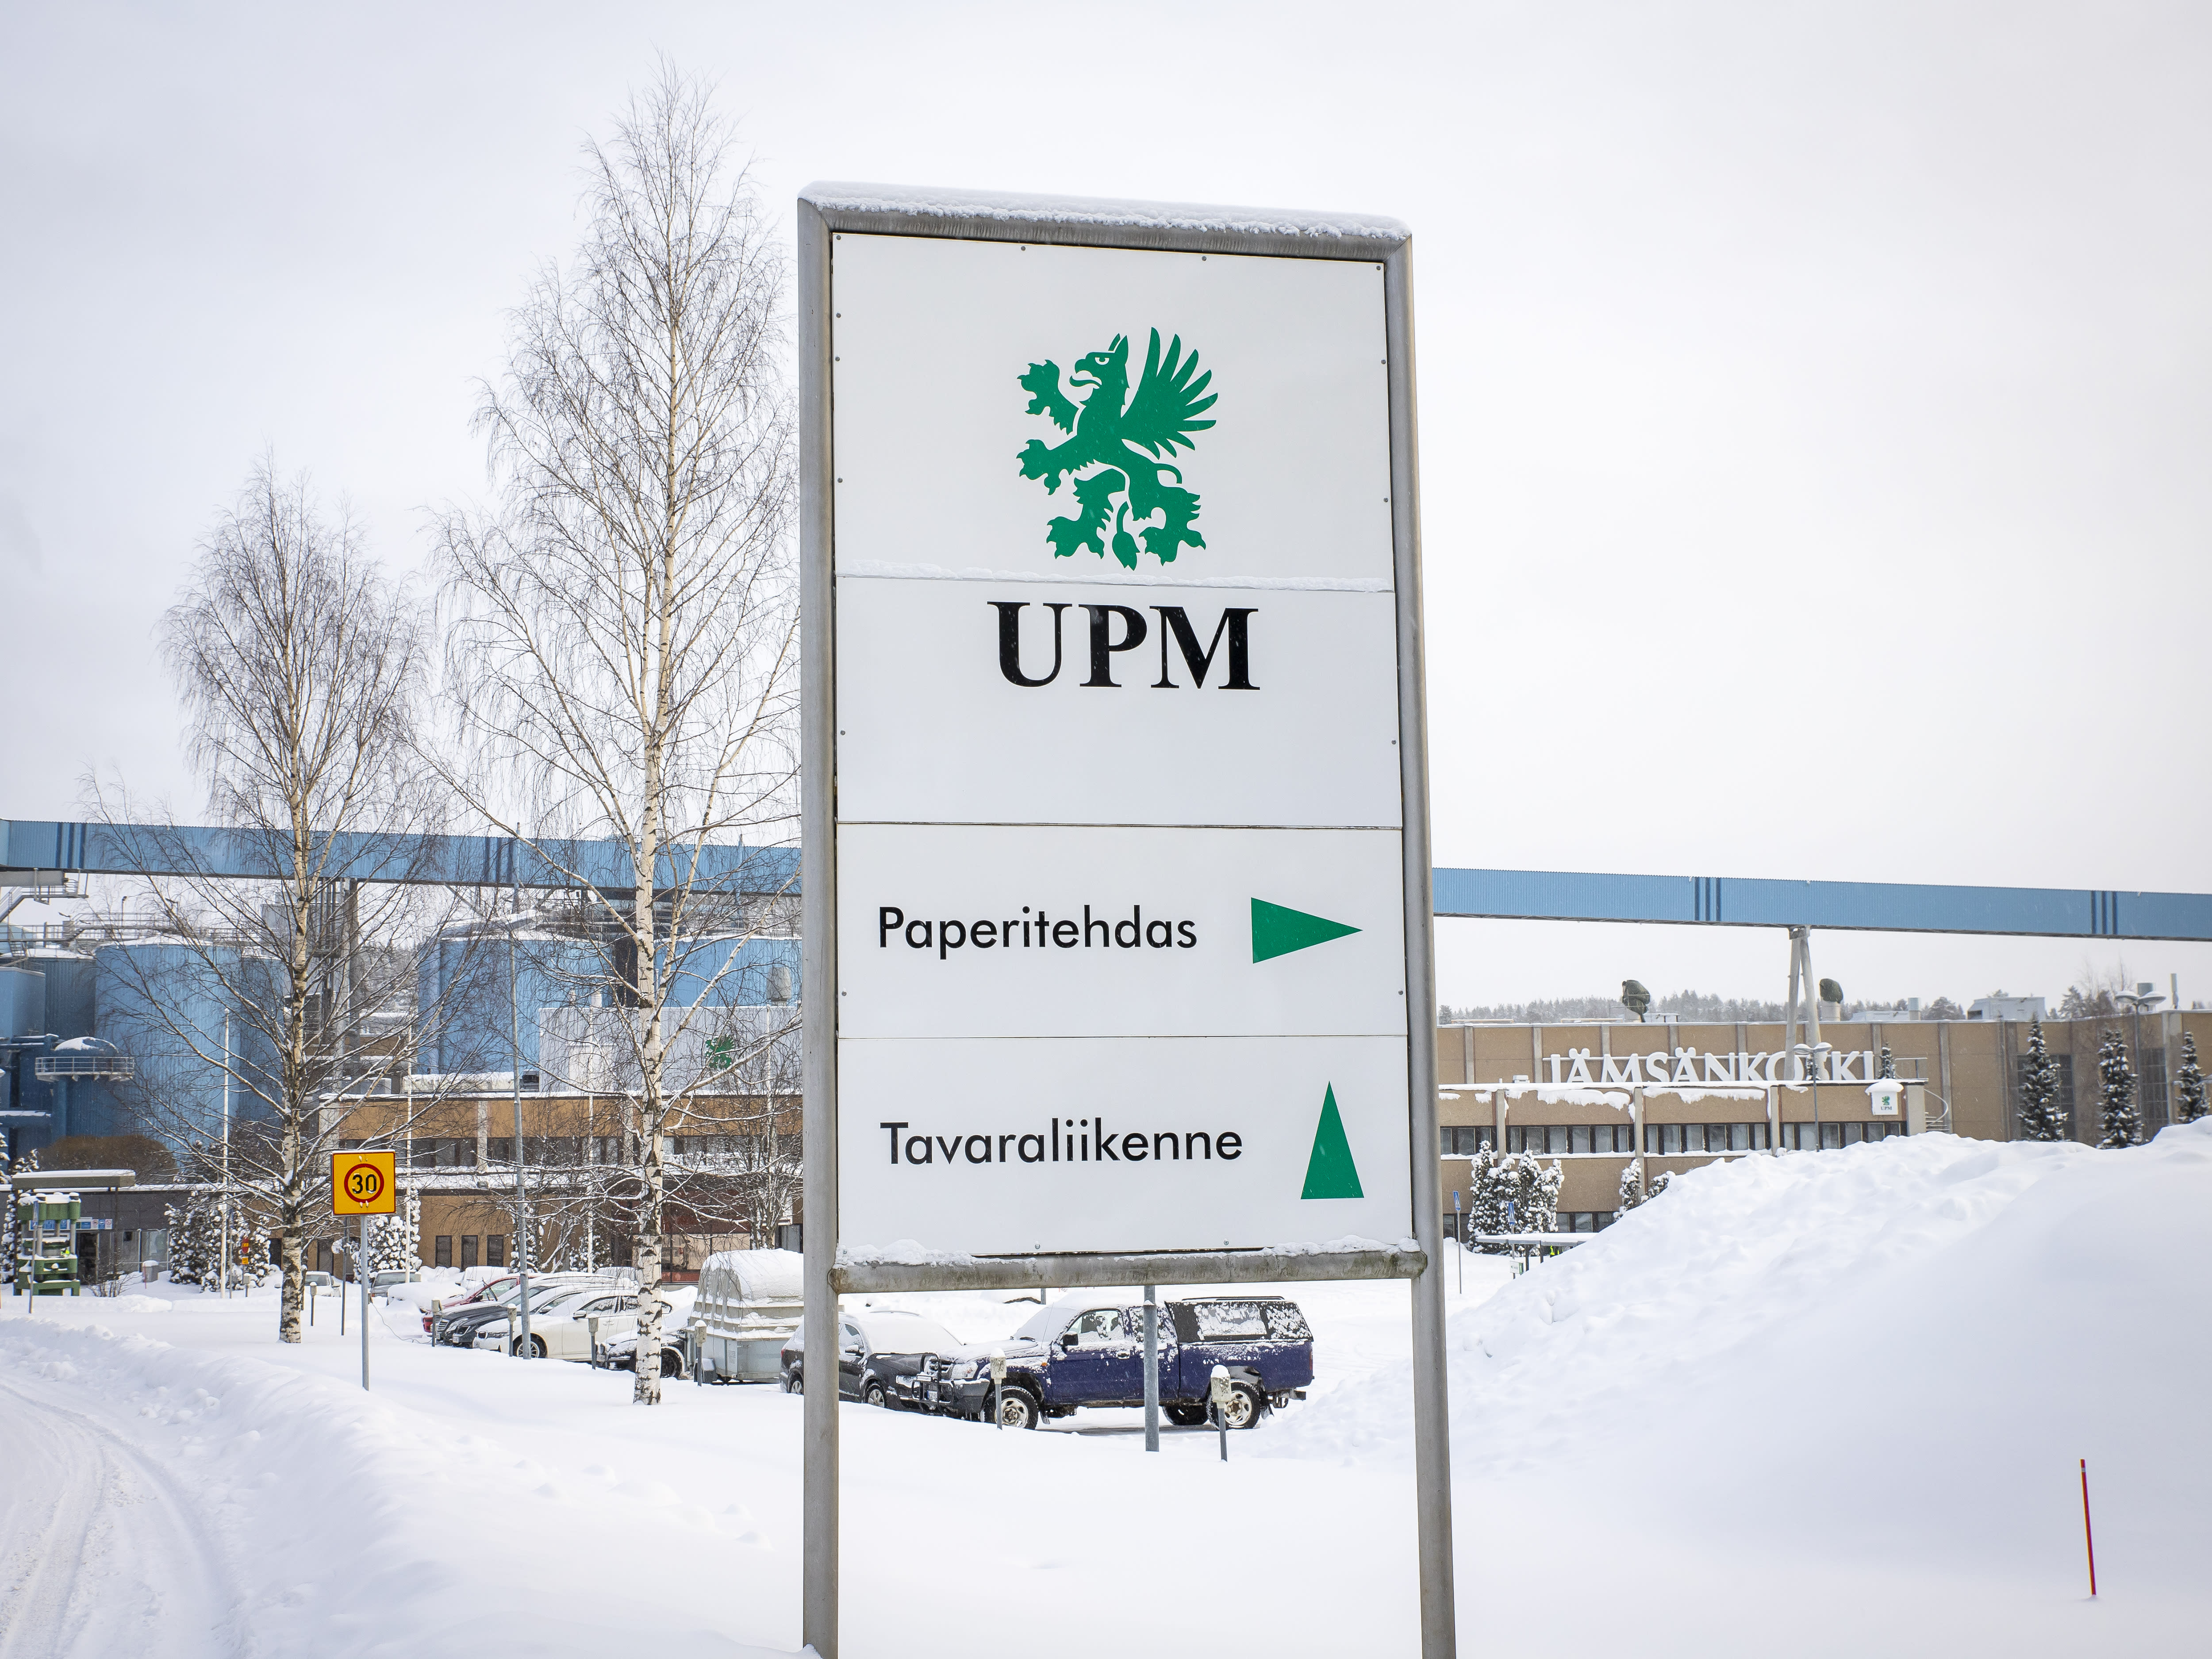 The strike at UPM’s mills will continue until mid-April